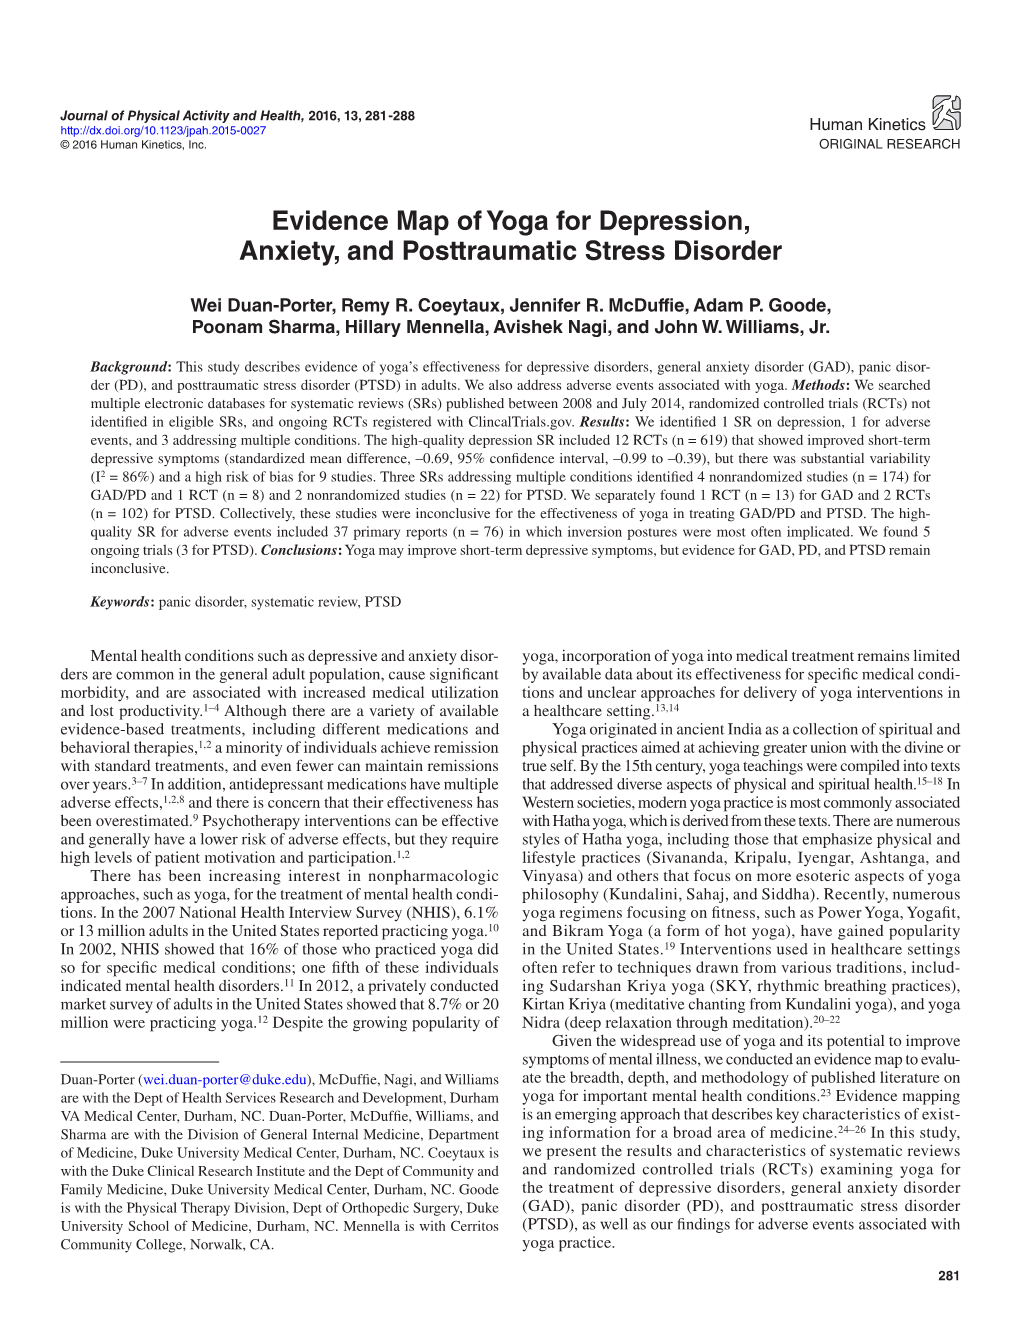 Evidence Map of Yoga for Depression, Anxiety, and Posttraumatic Stress Disorder